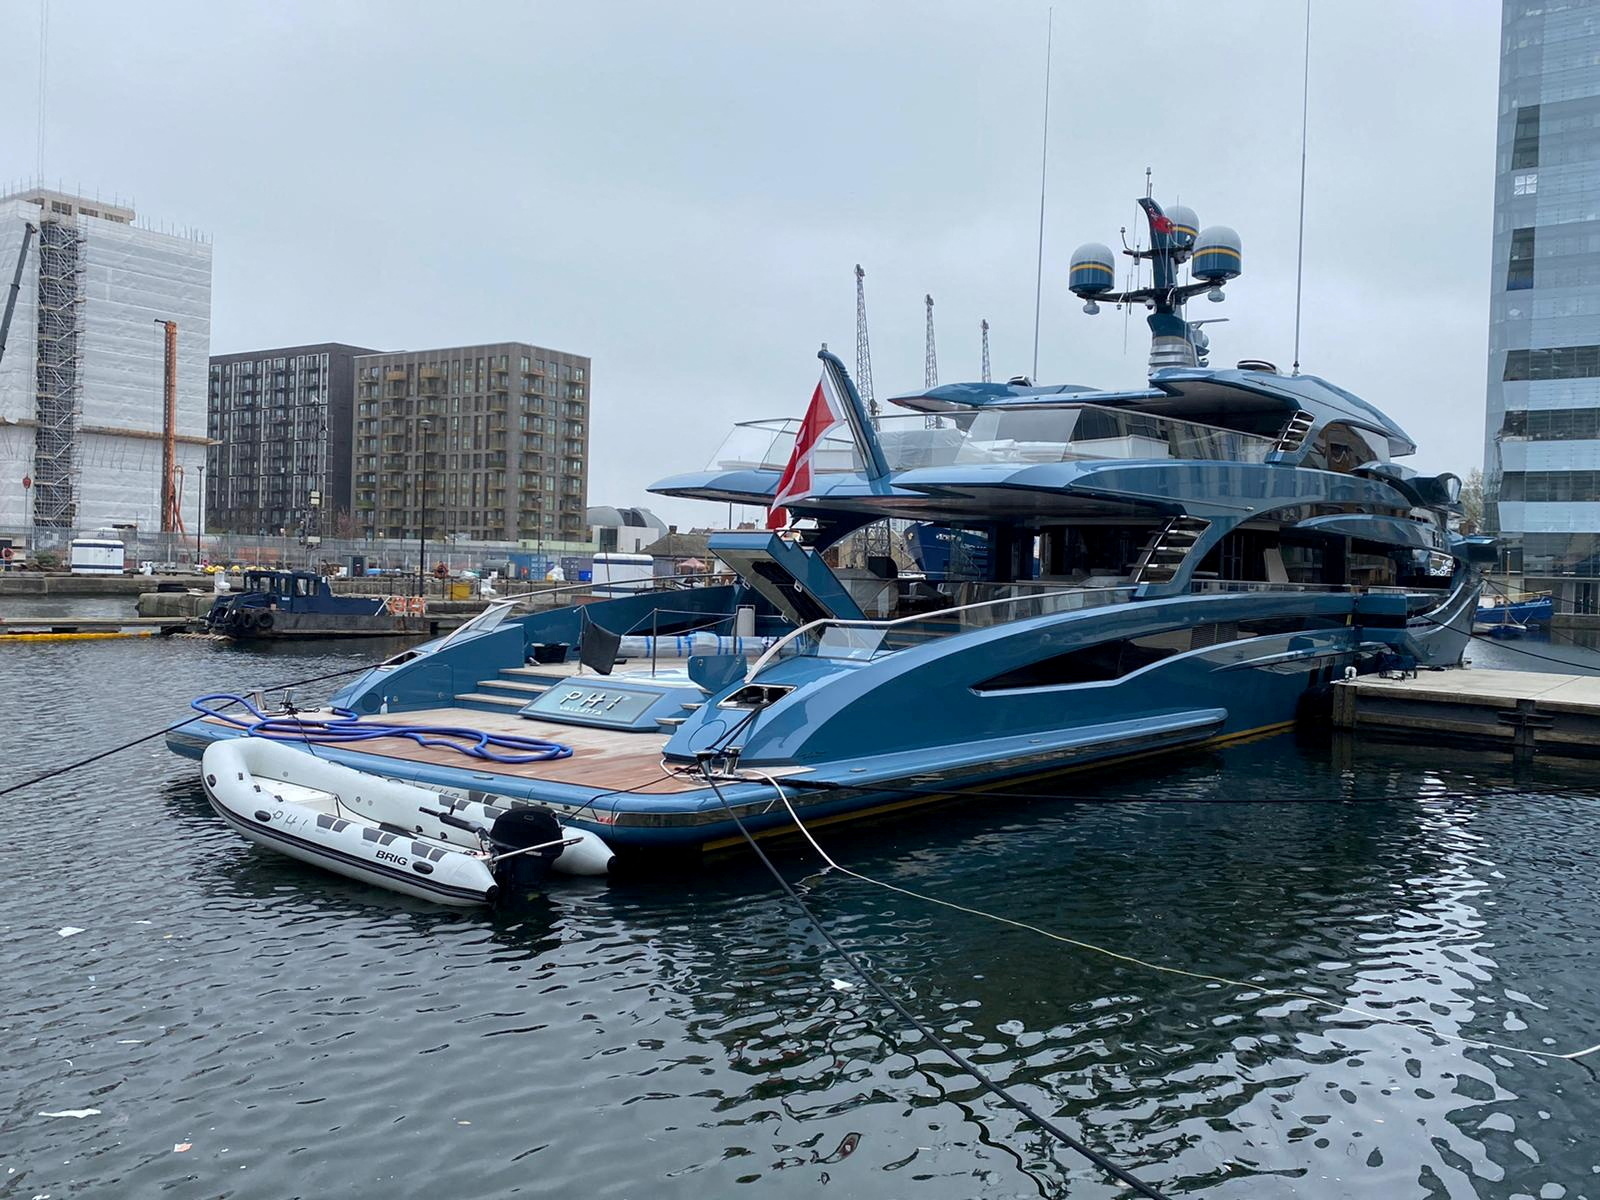 Russian-owned super-yacht Phi is seen after being detained by National Crime Agency's Combating Kleptocracy Cell in Canary Wharf